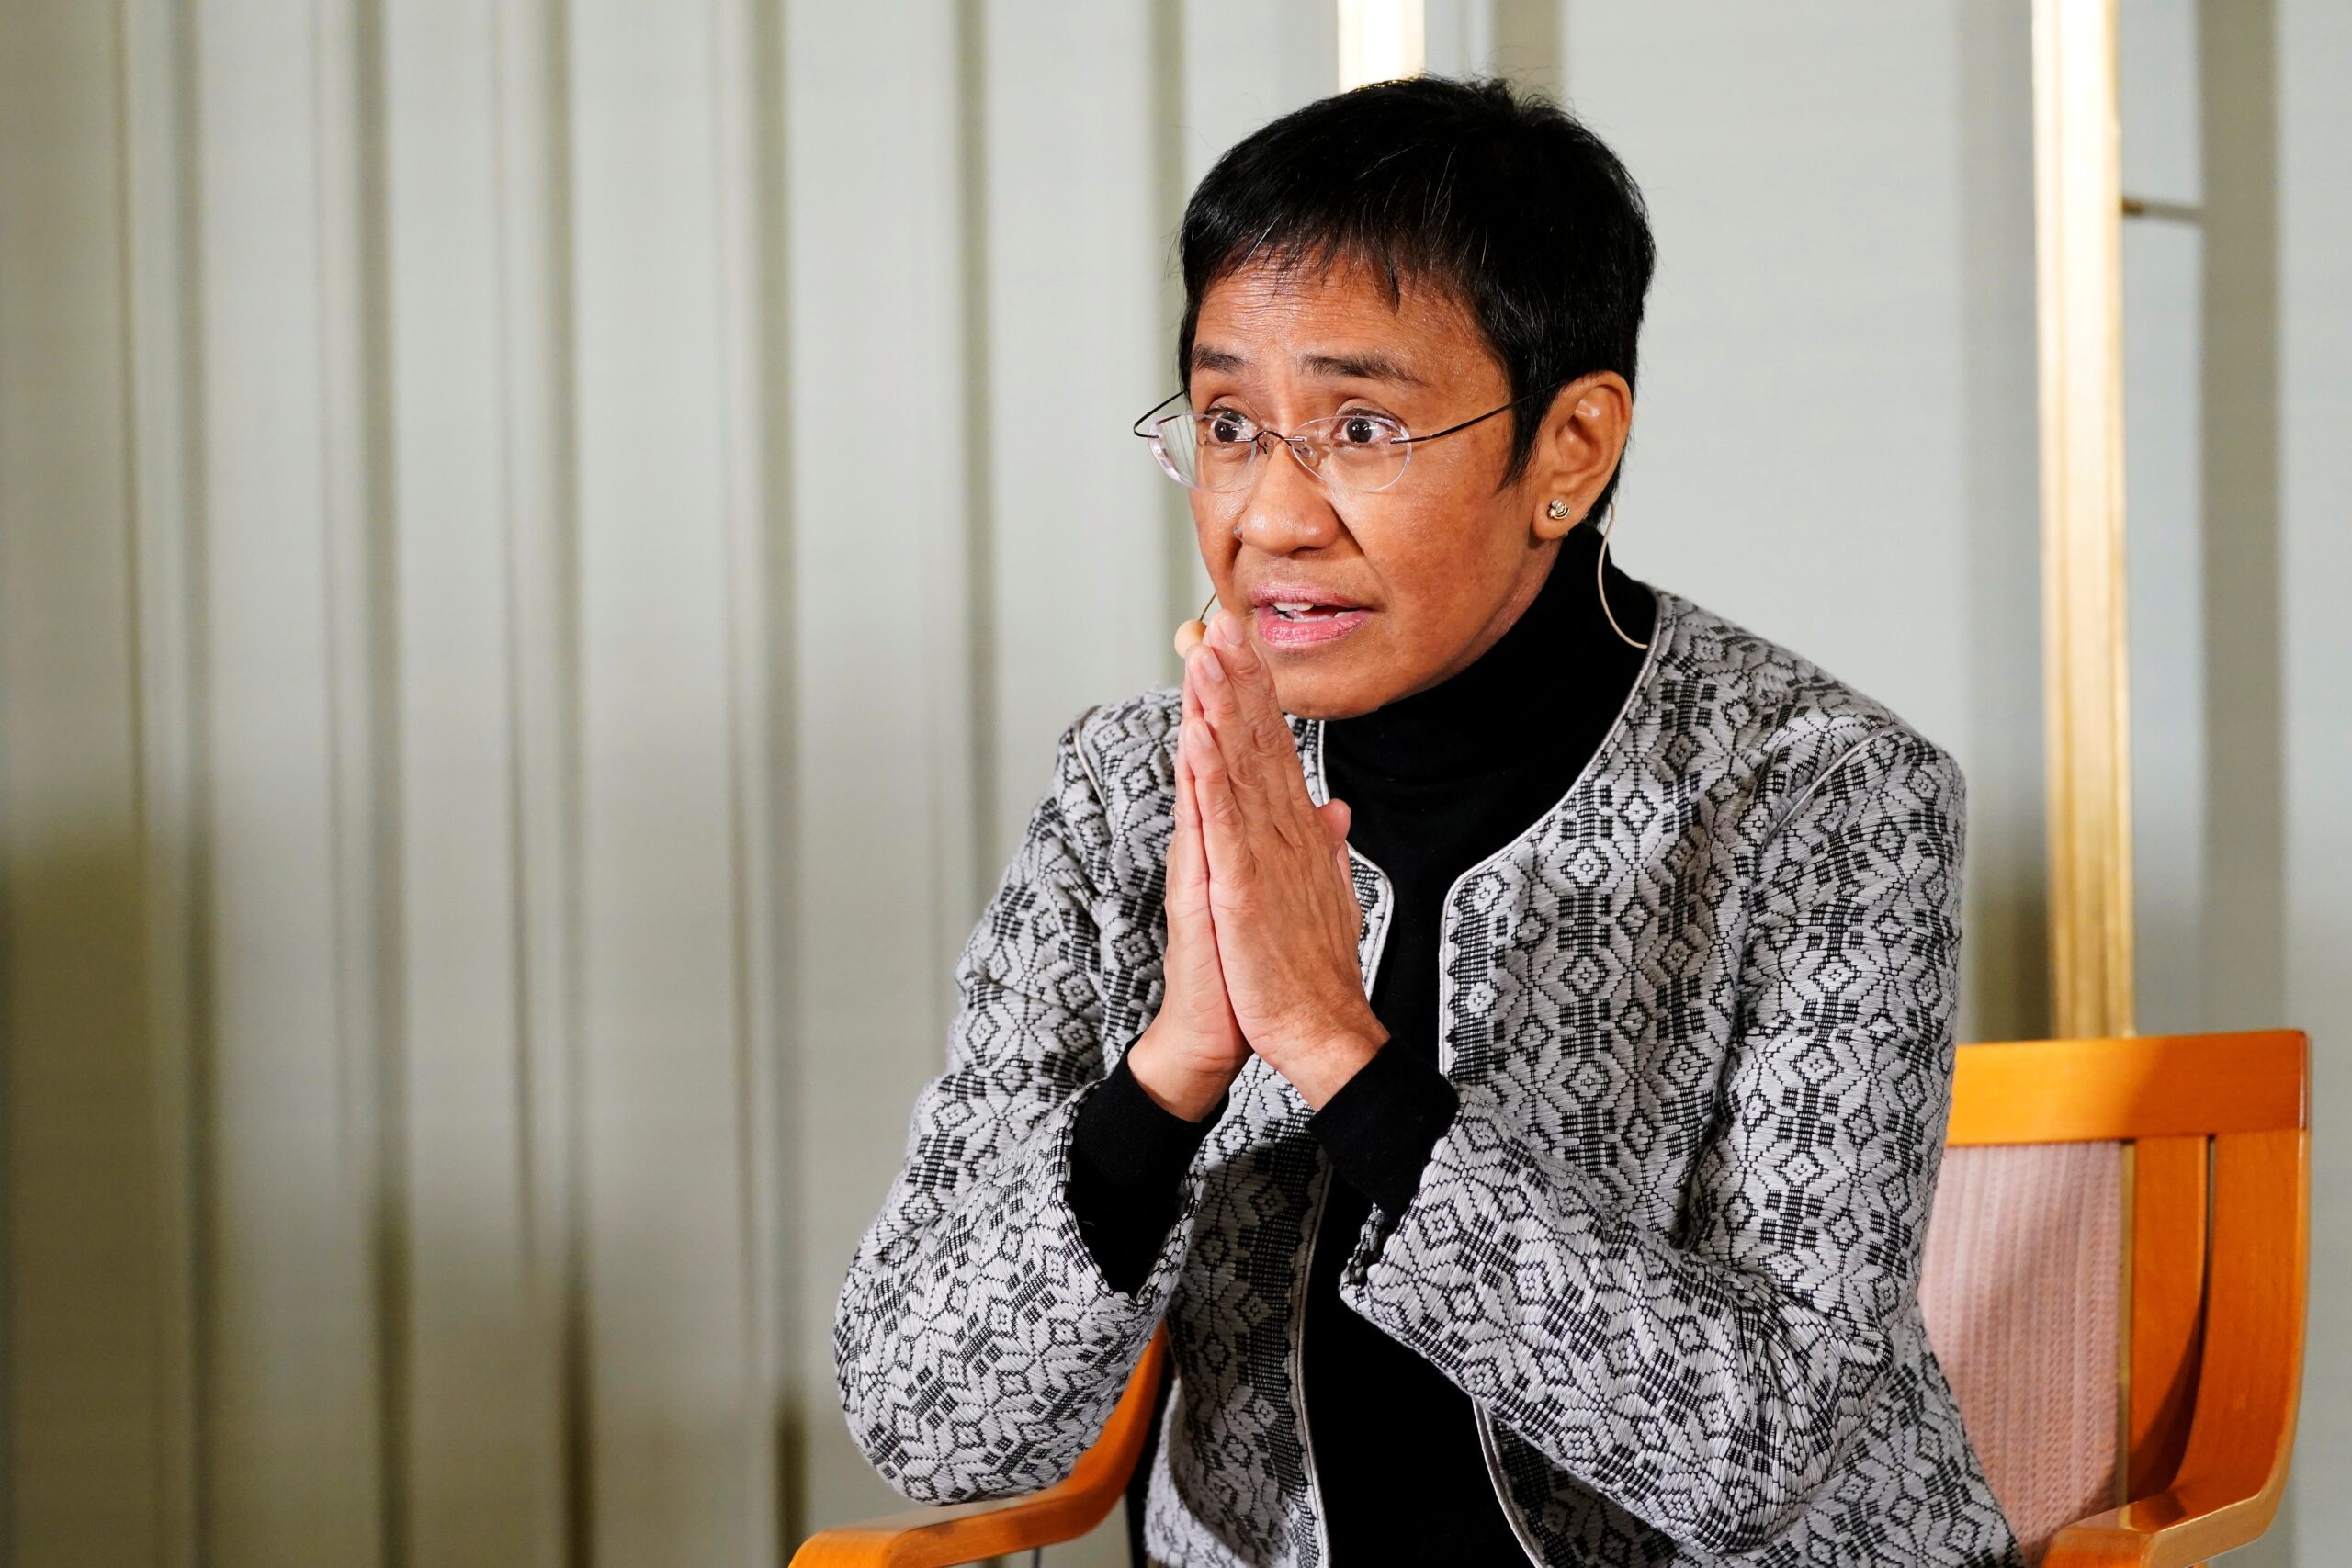 Maria Ressa to Senate: Make law holding social media giants liable for lies spread